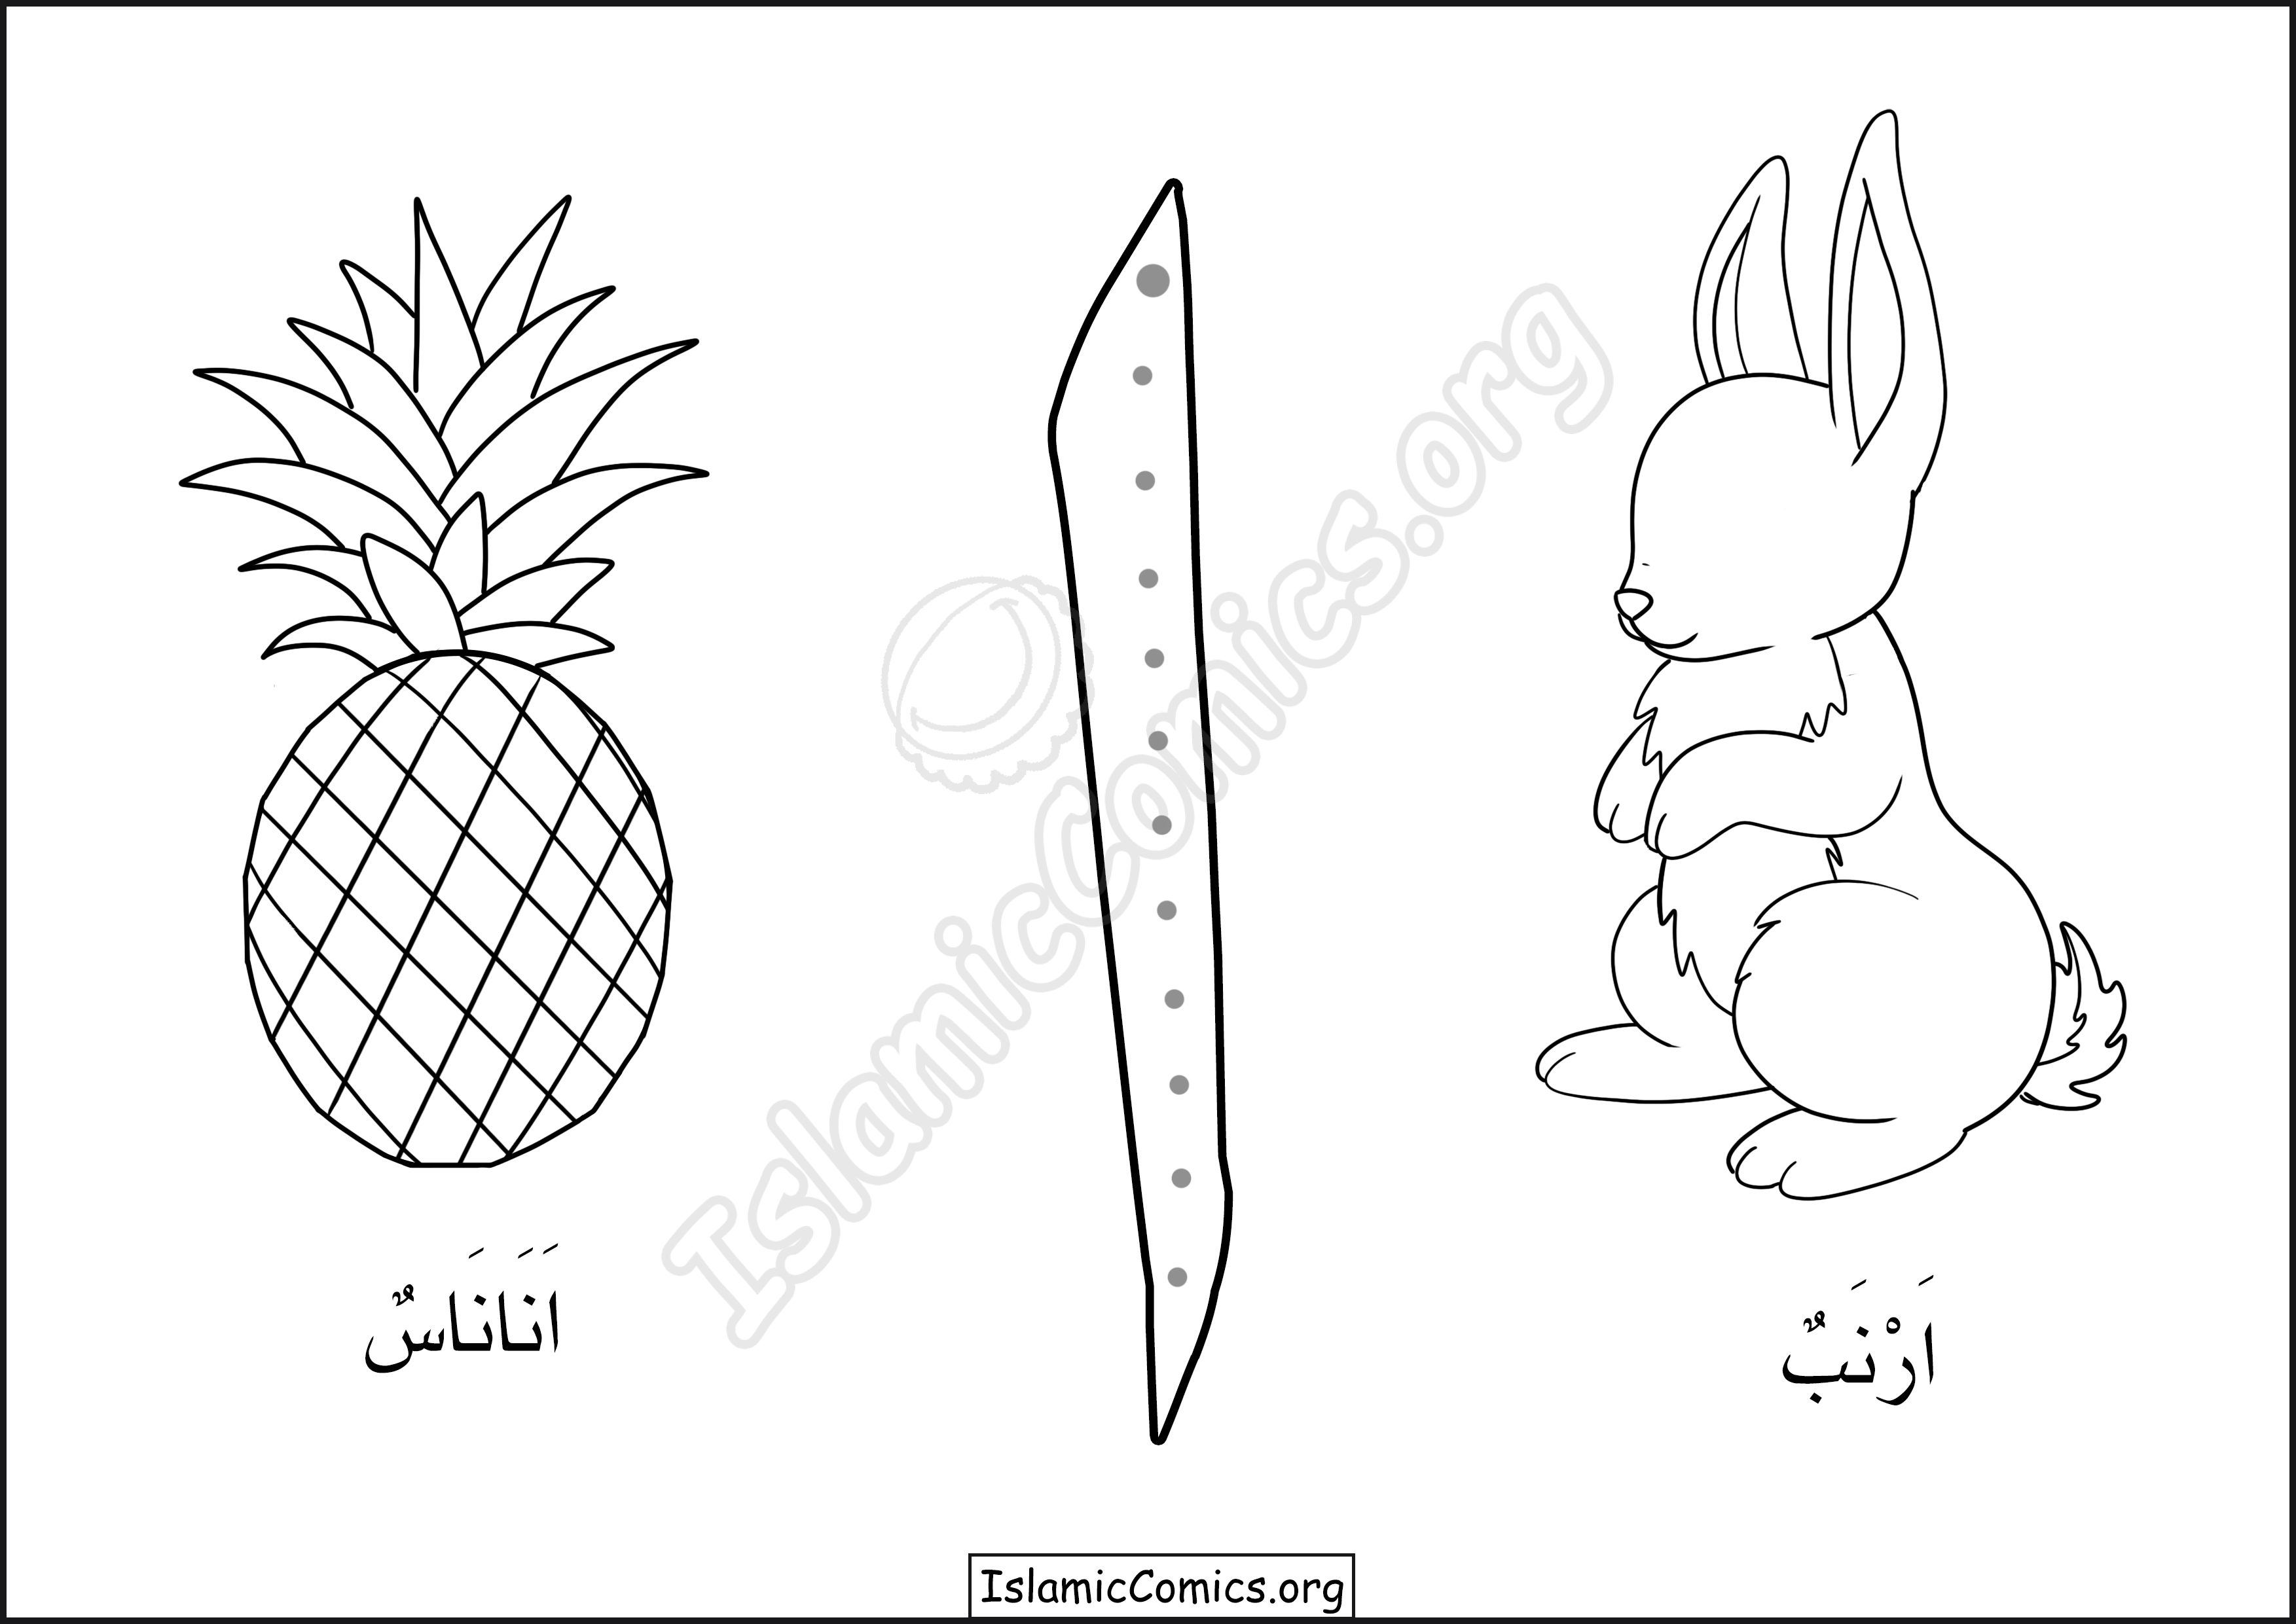 Printable Activity Pages for the Arabic Alphabet – Islamic Comics